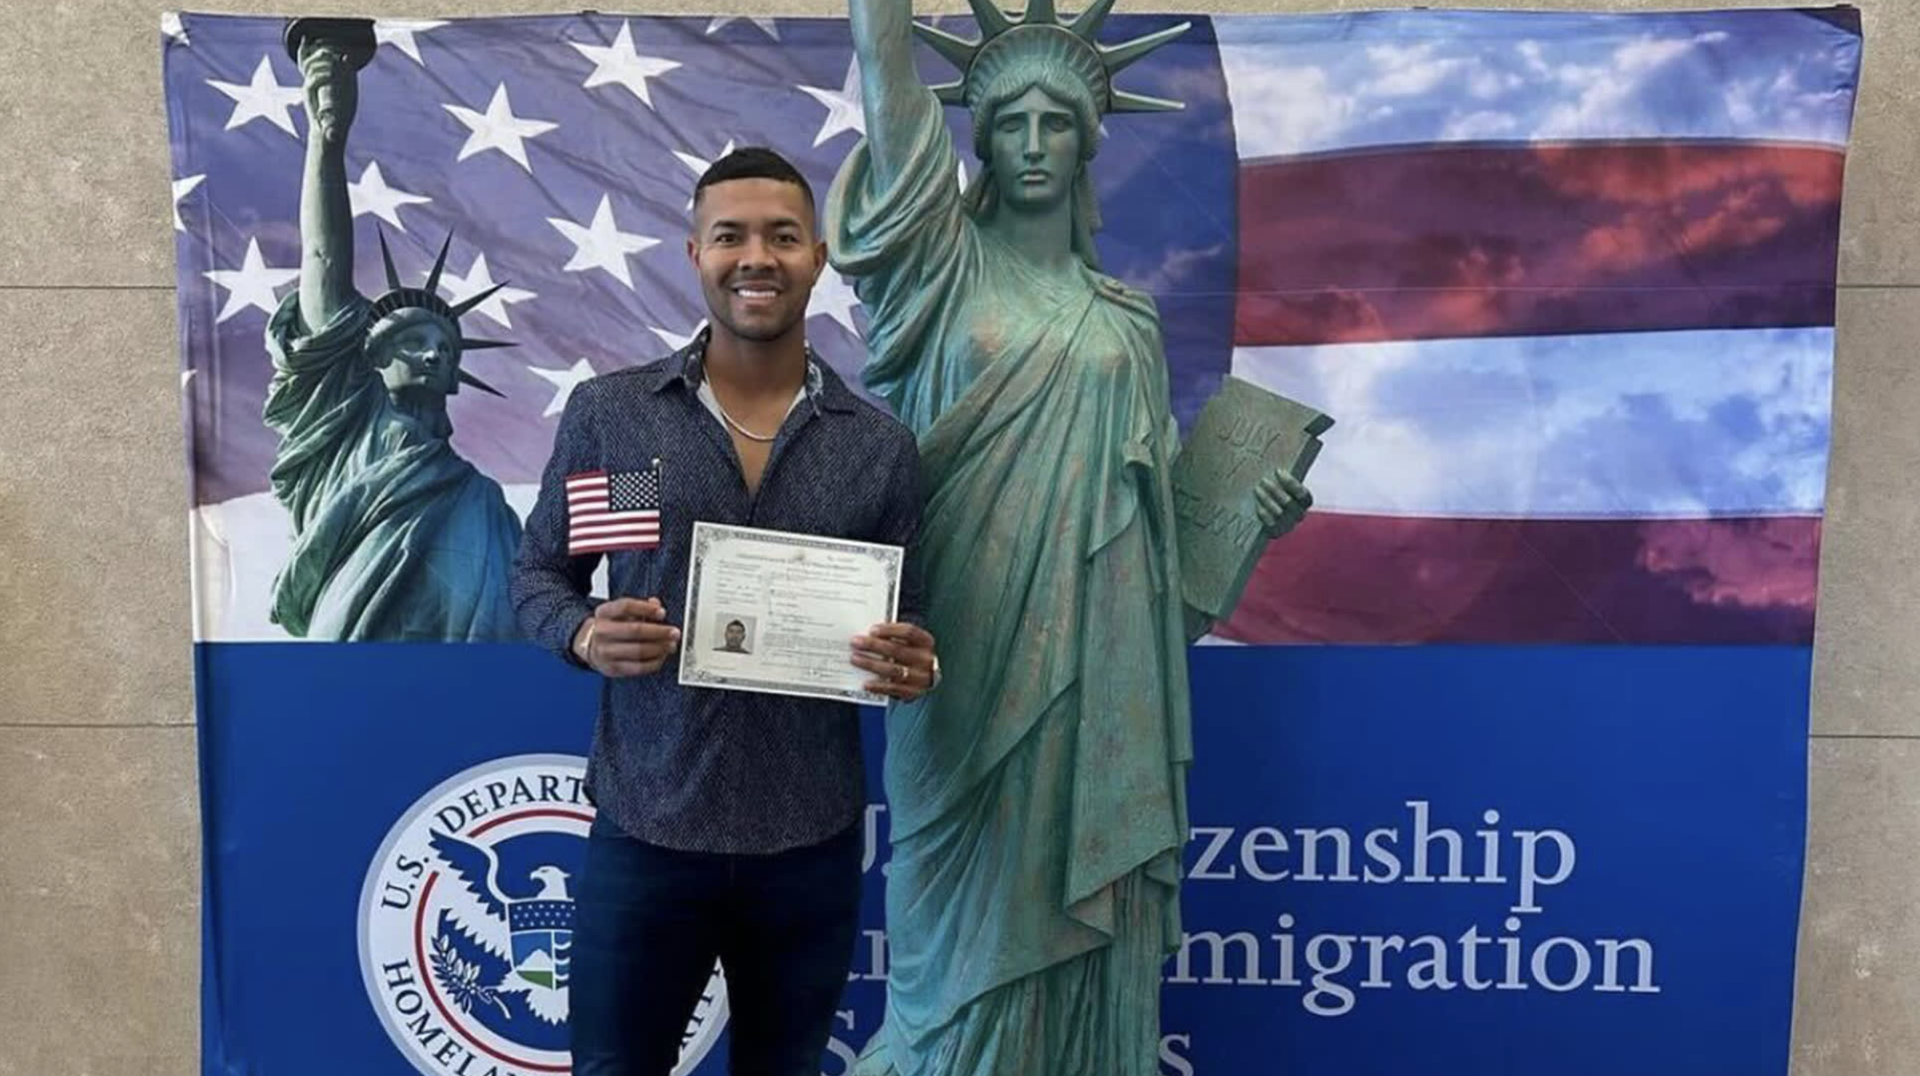 José Quintana with his Certificate of Citizenship